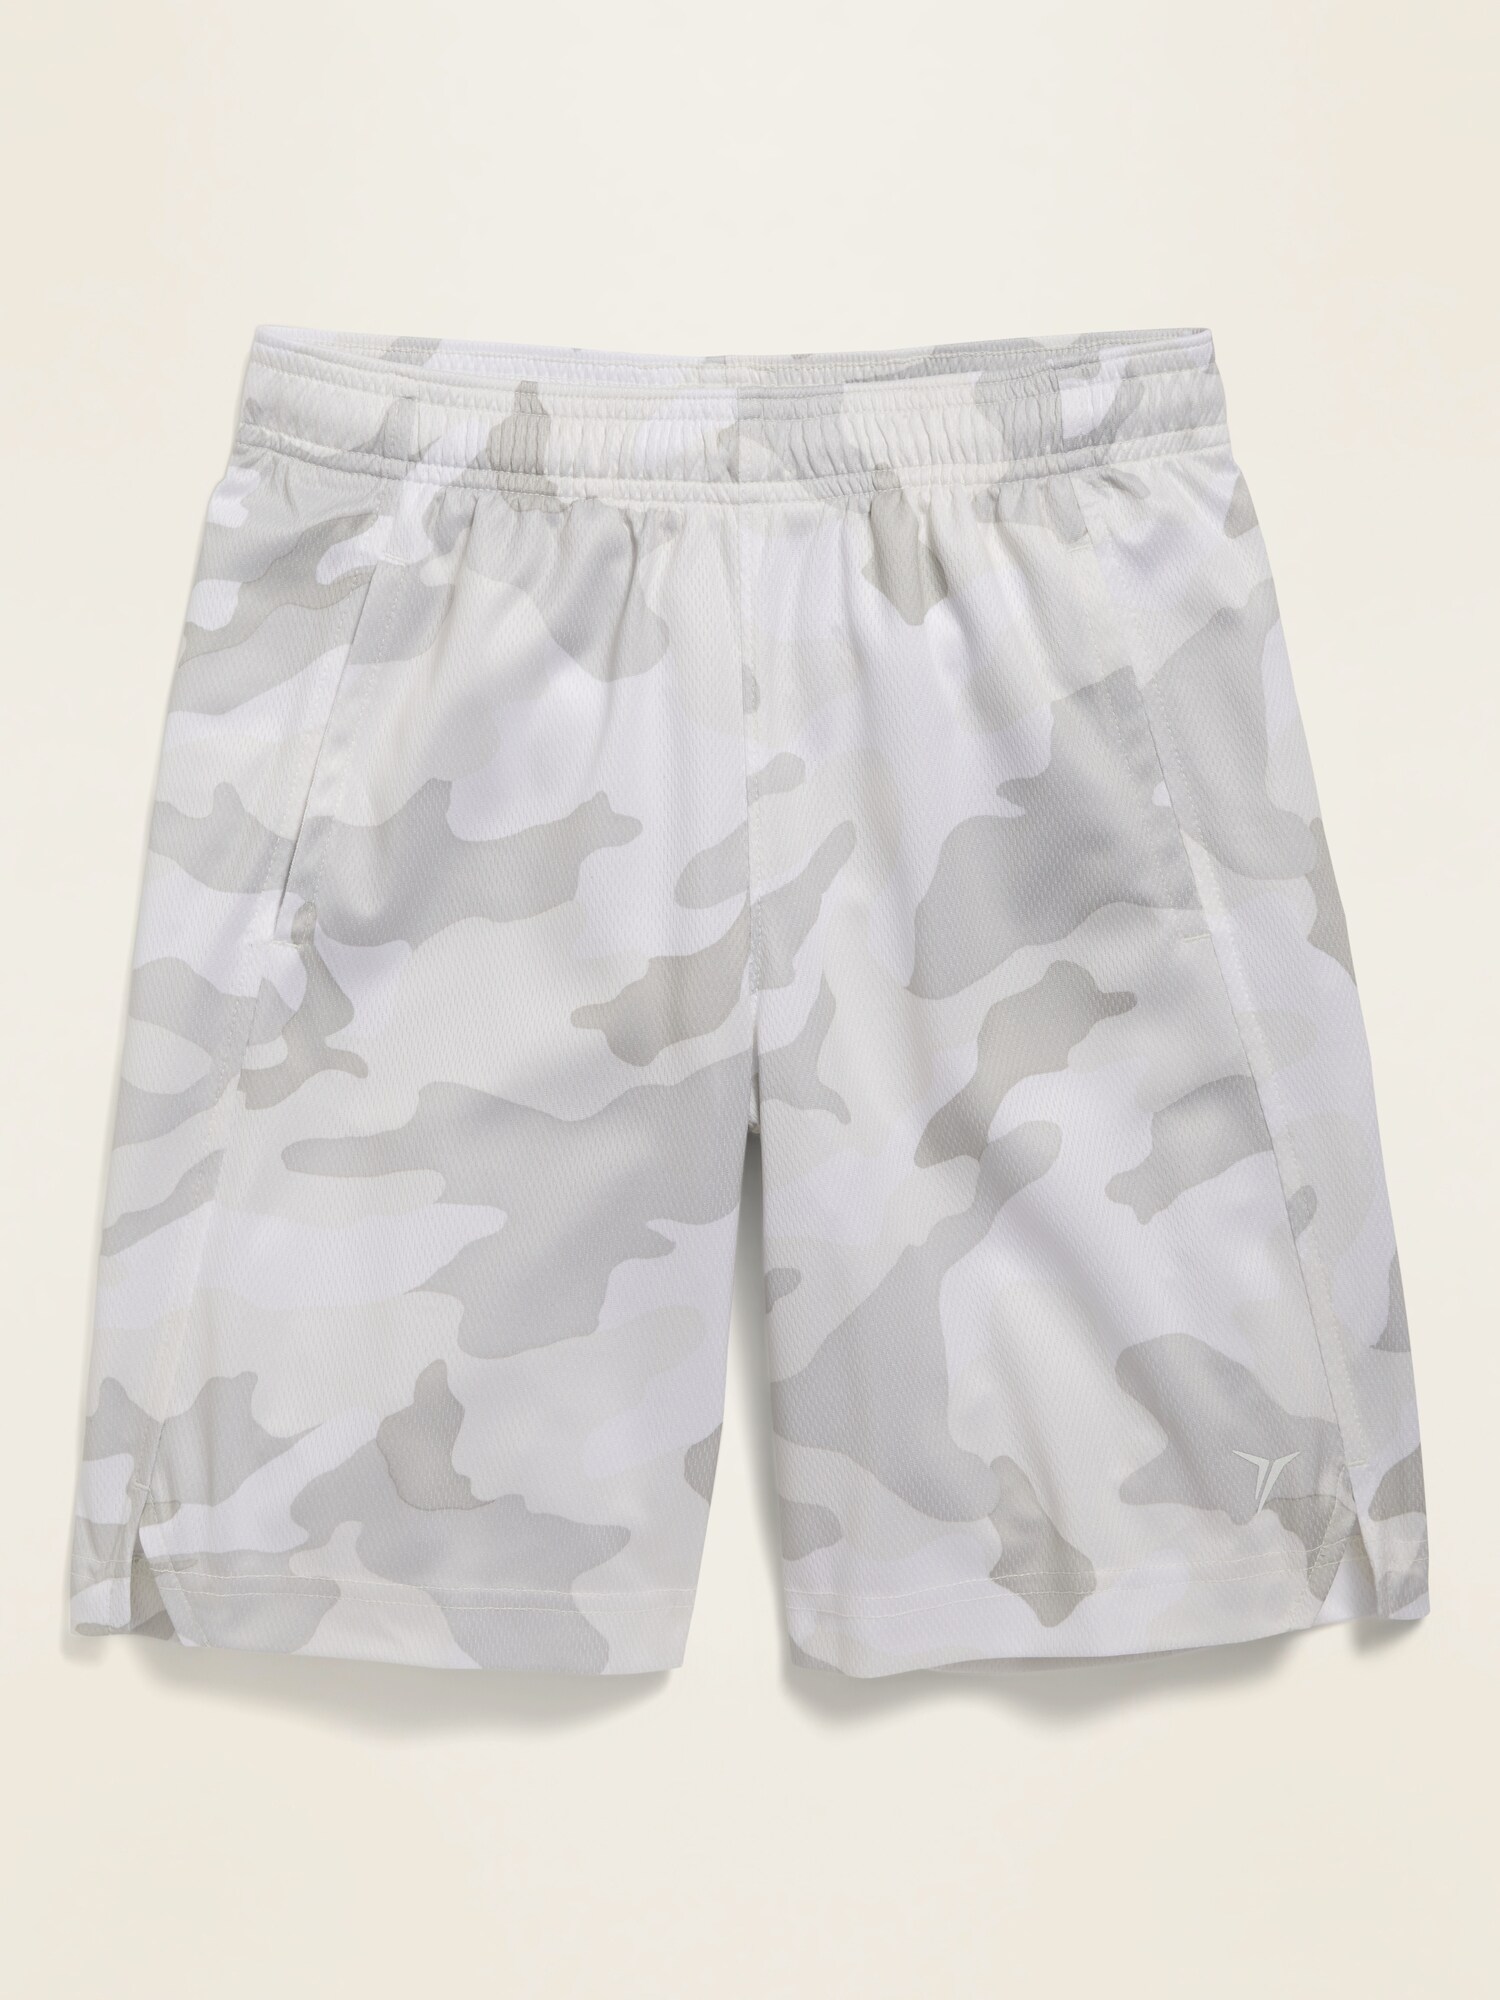 *Today Only Deal* Printed Go-Dry Mesh Performance Shorts for Boys